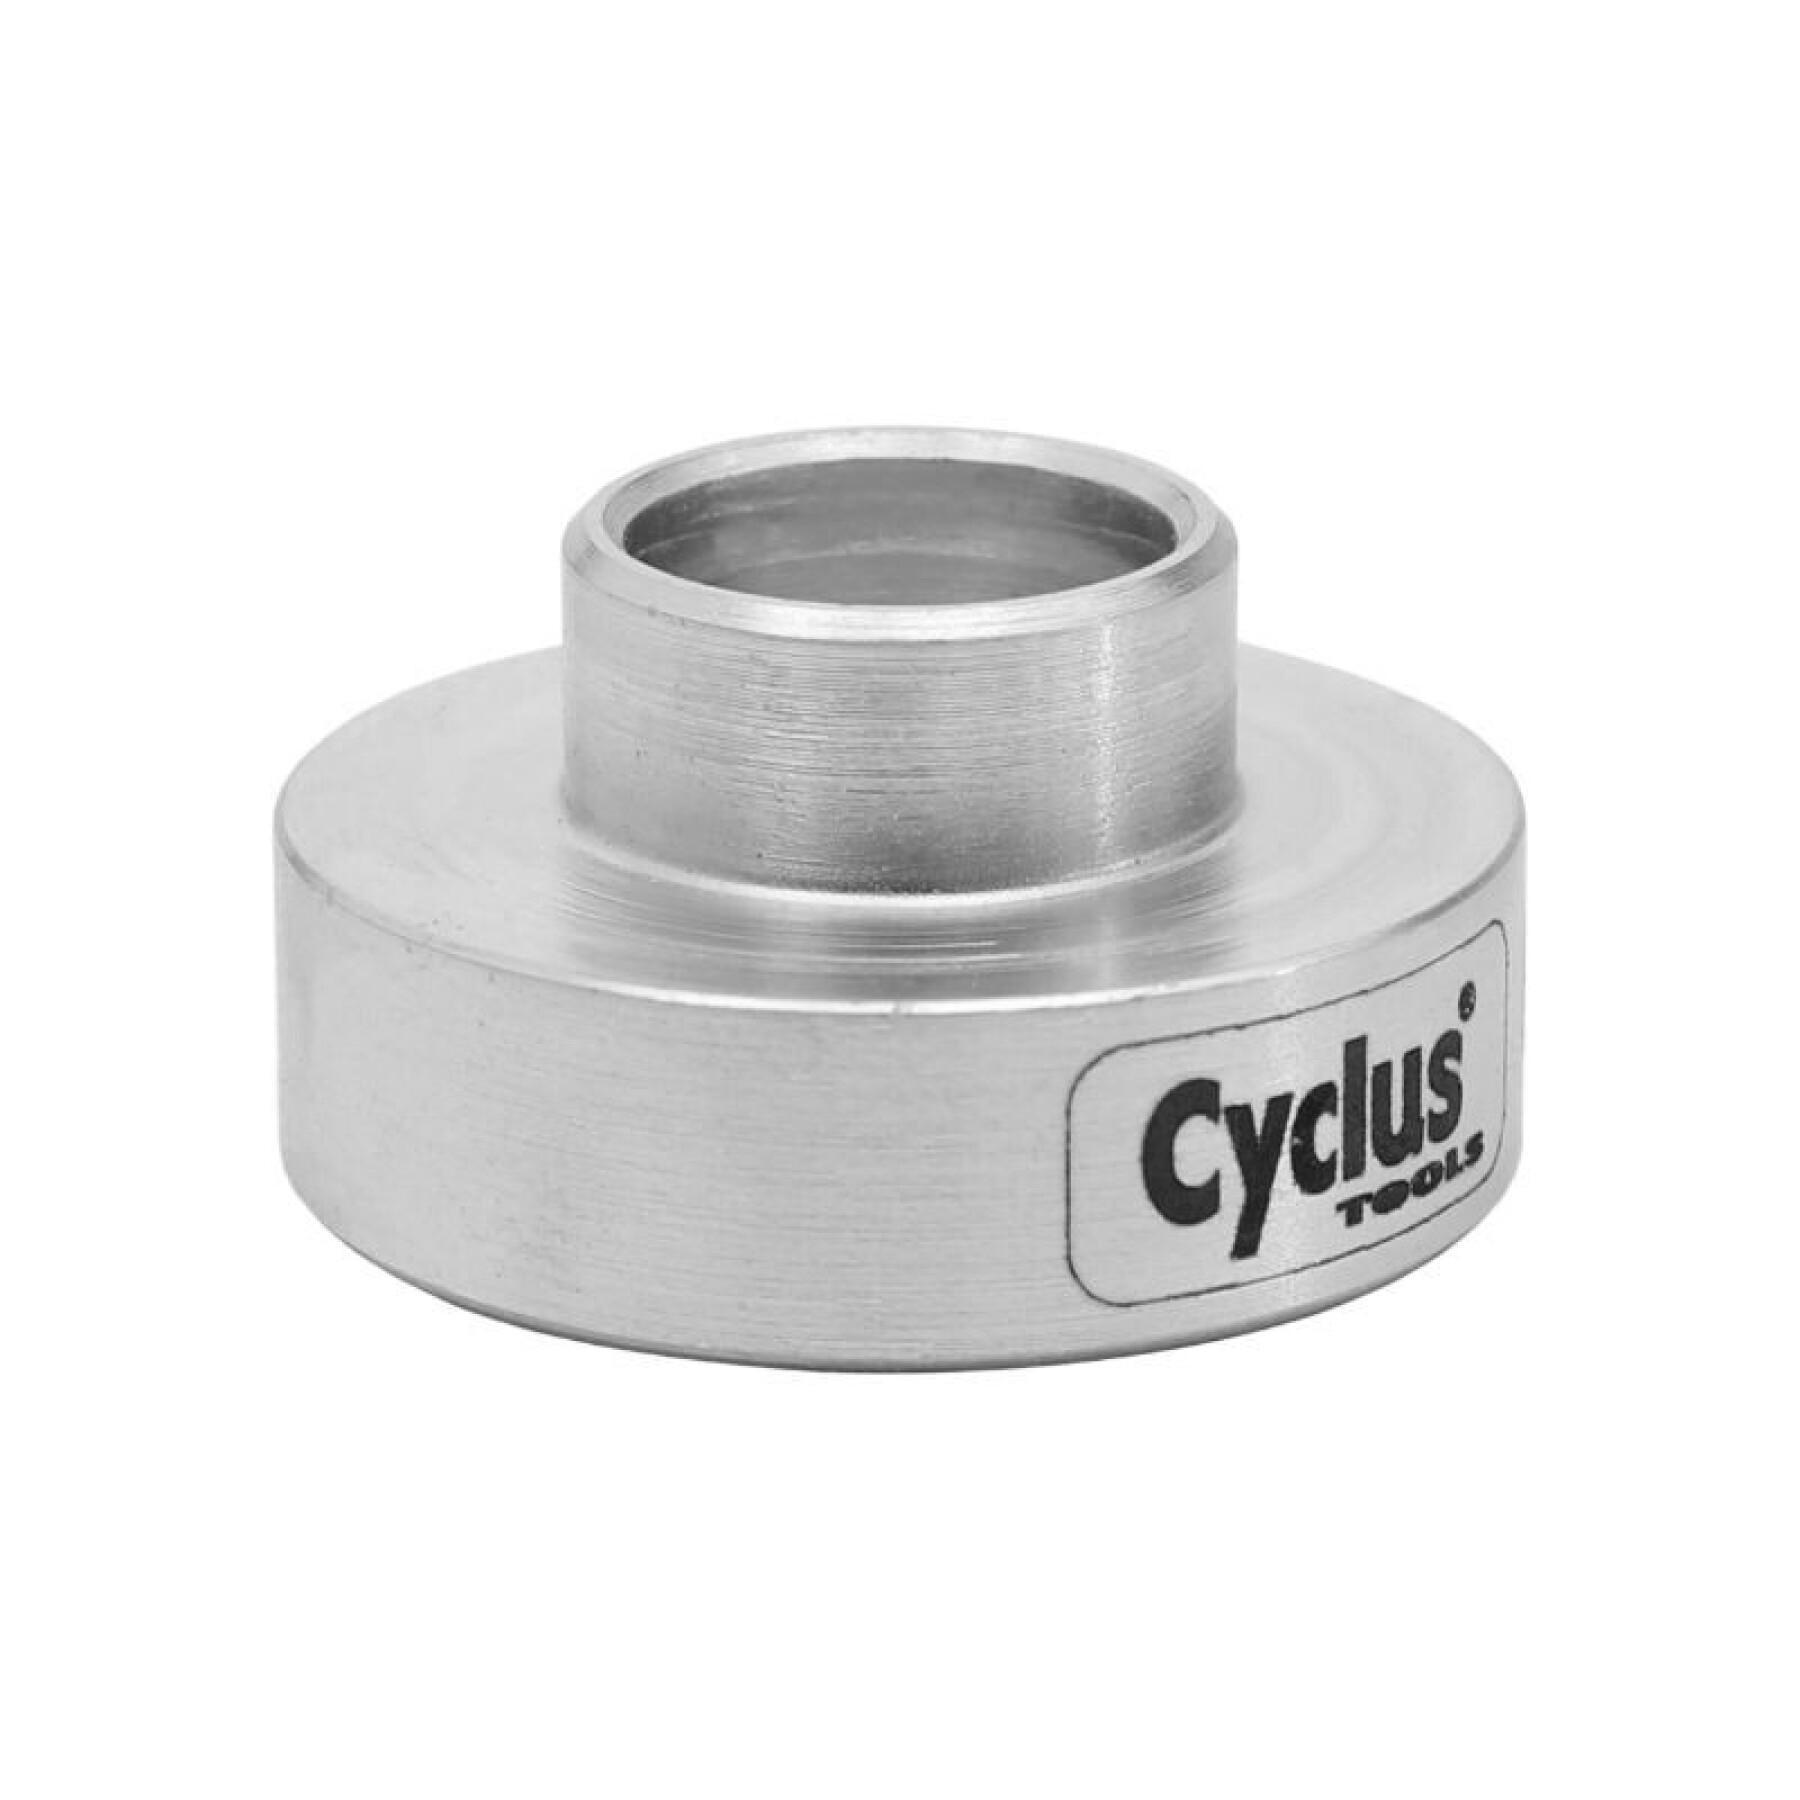 Tool pro bearing support to use with the bearing press Cyclus ref 180126 -